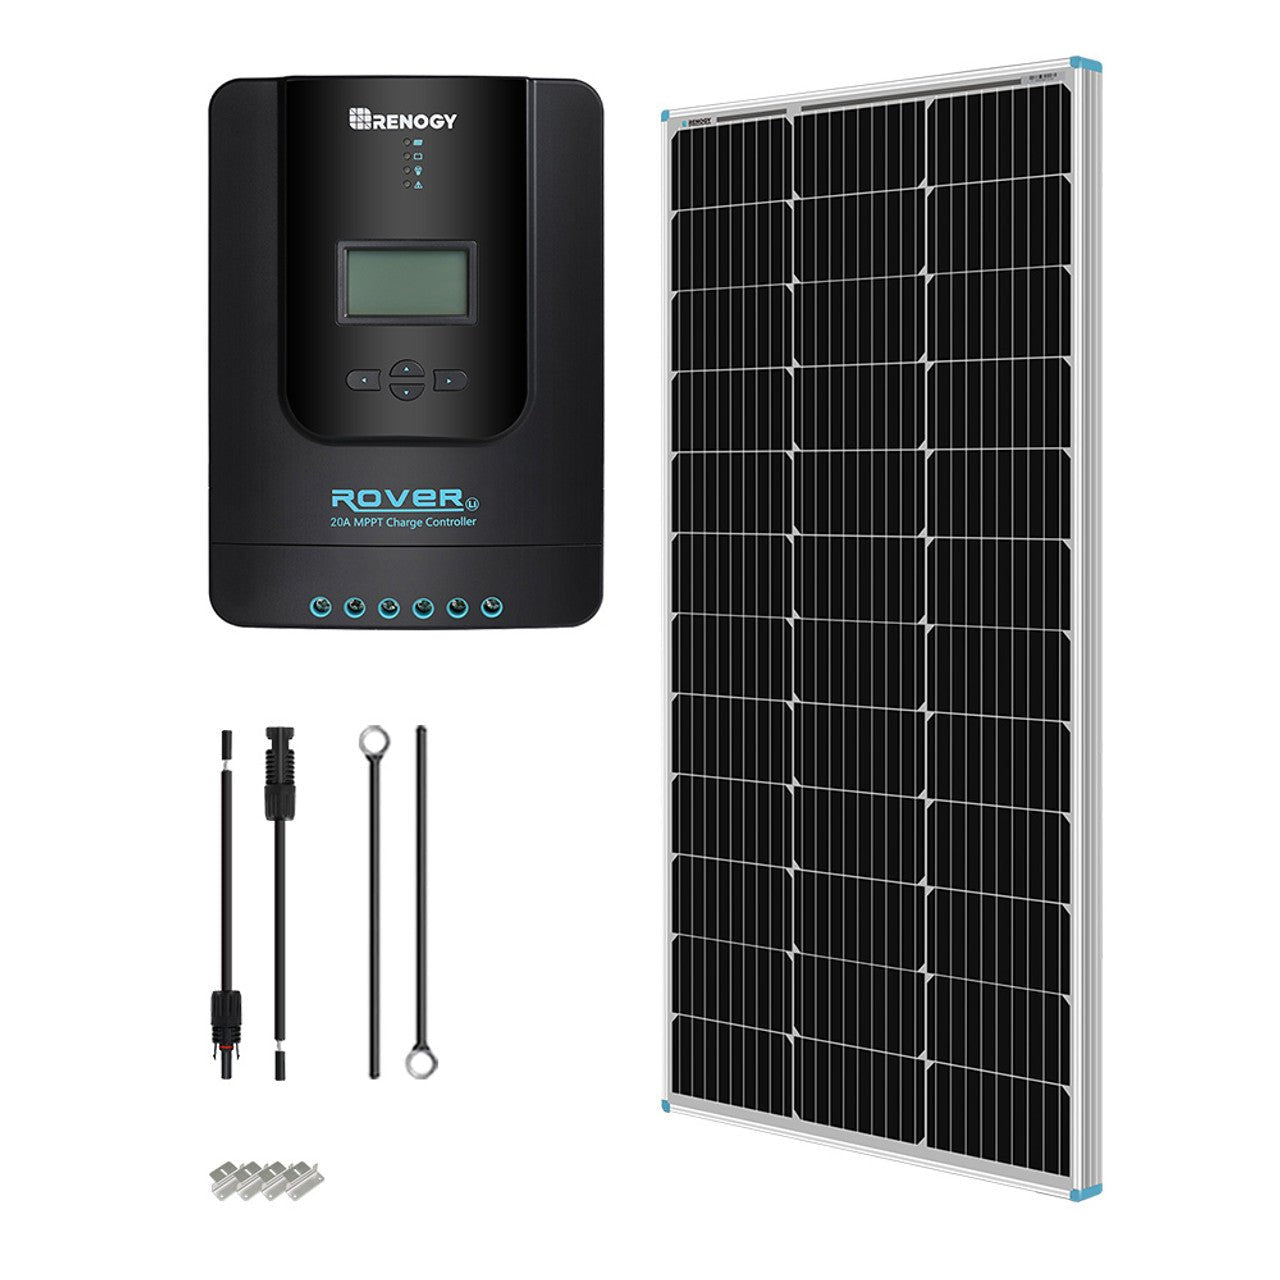 Renogy 100 Watt 12 Volt Solar Starter Kit with 20A MPPT Charge Controller - Solar Generators and Power Stations Plus